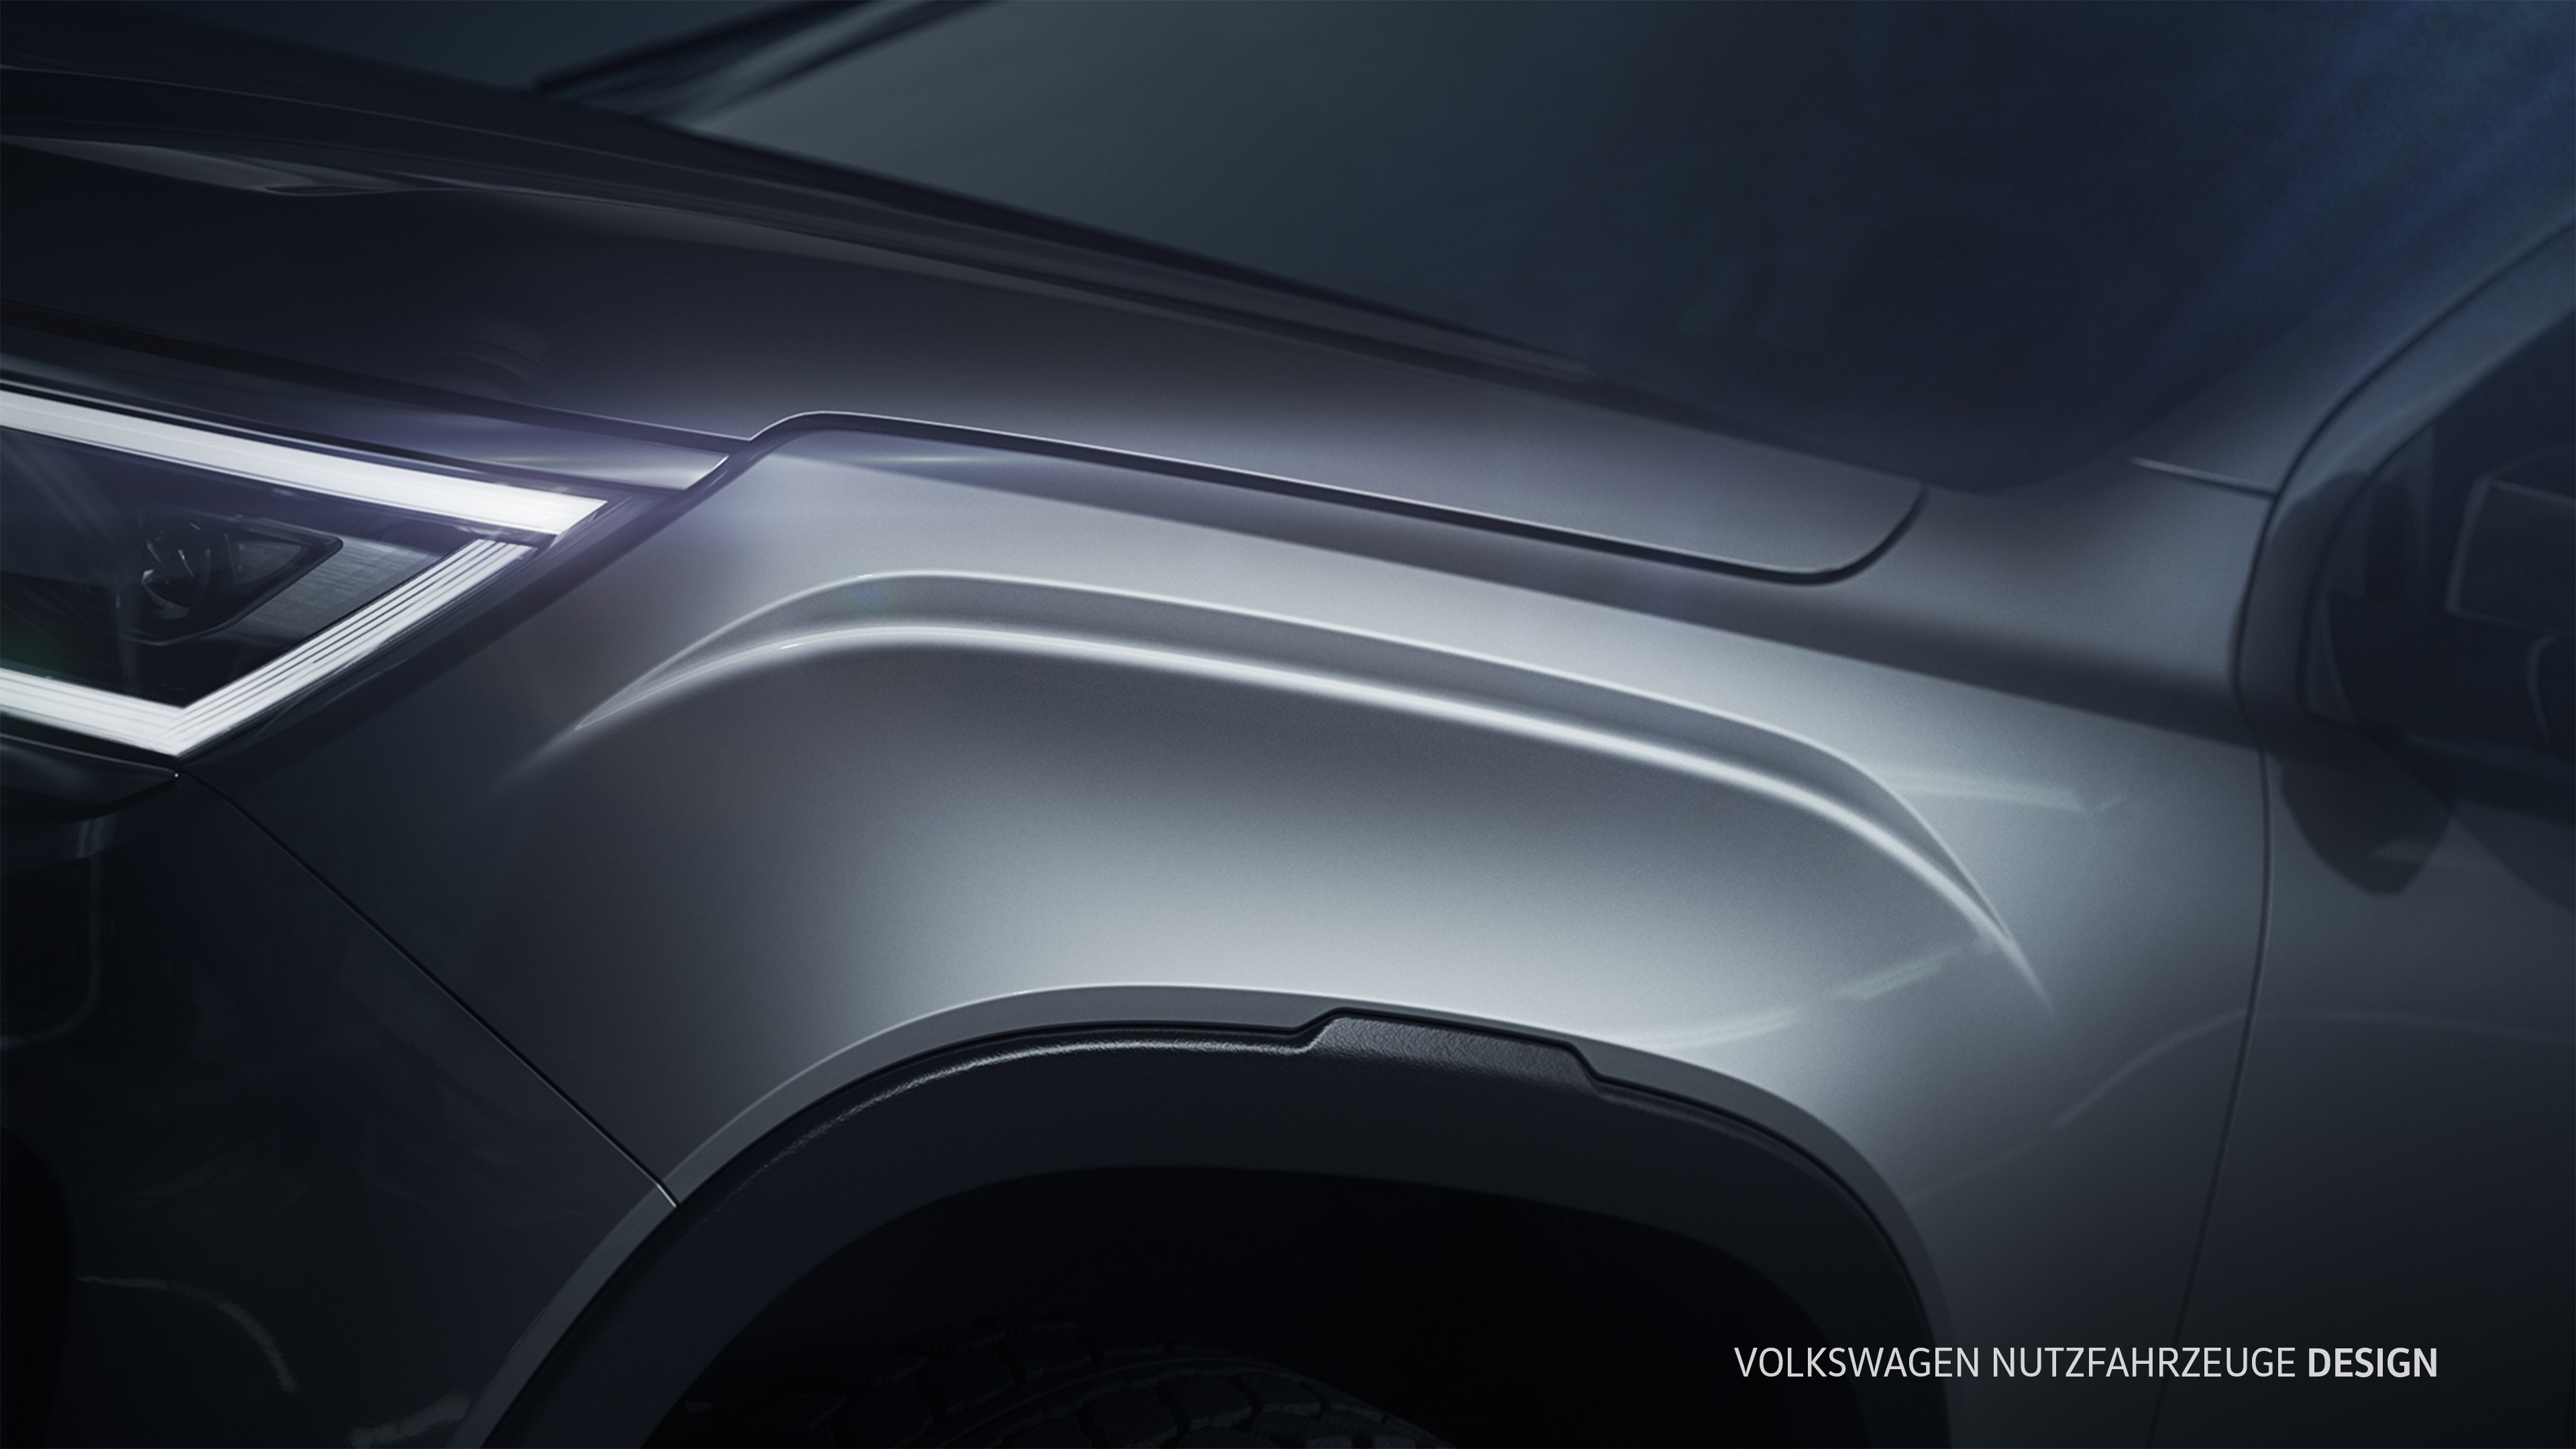 The new VW Amarok to premiere on 7th July